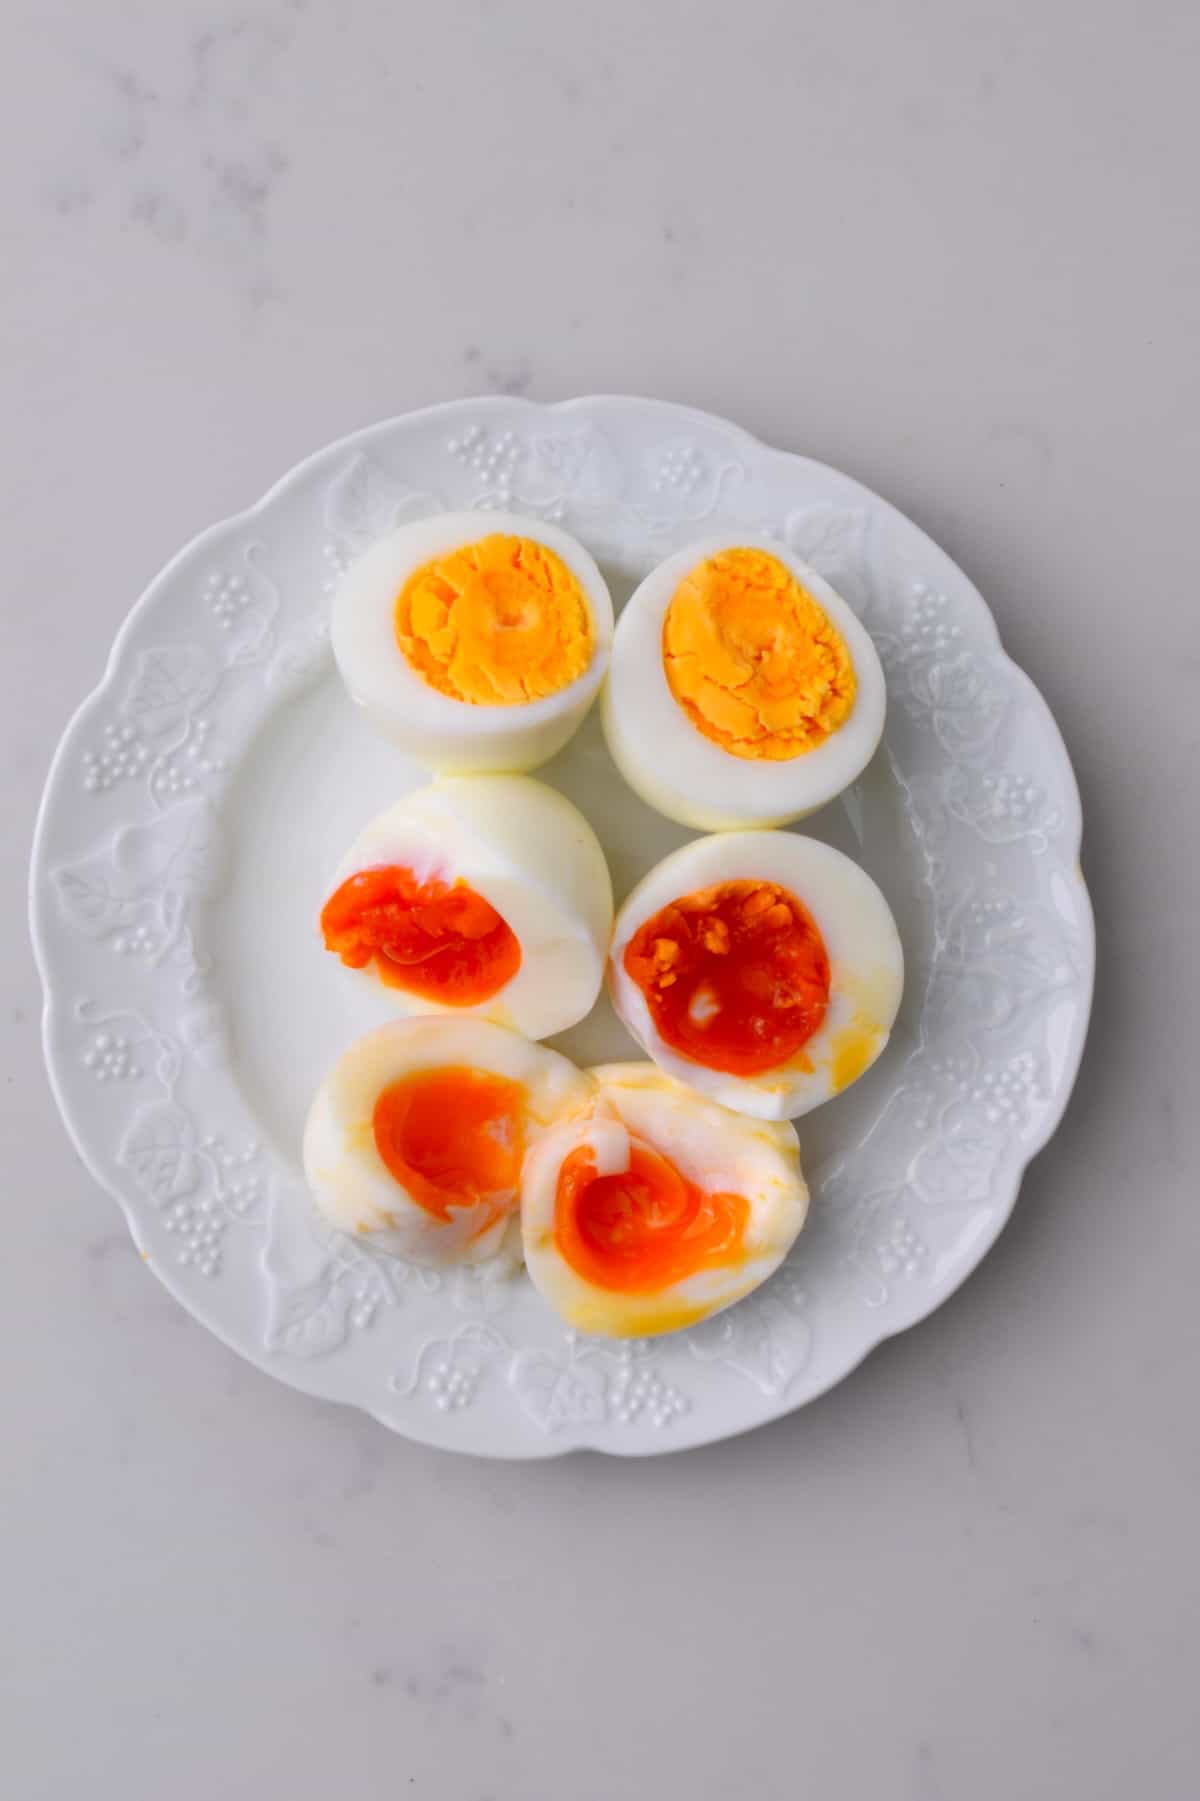 A plate with cooked eggs cut in half